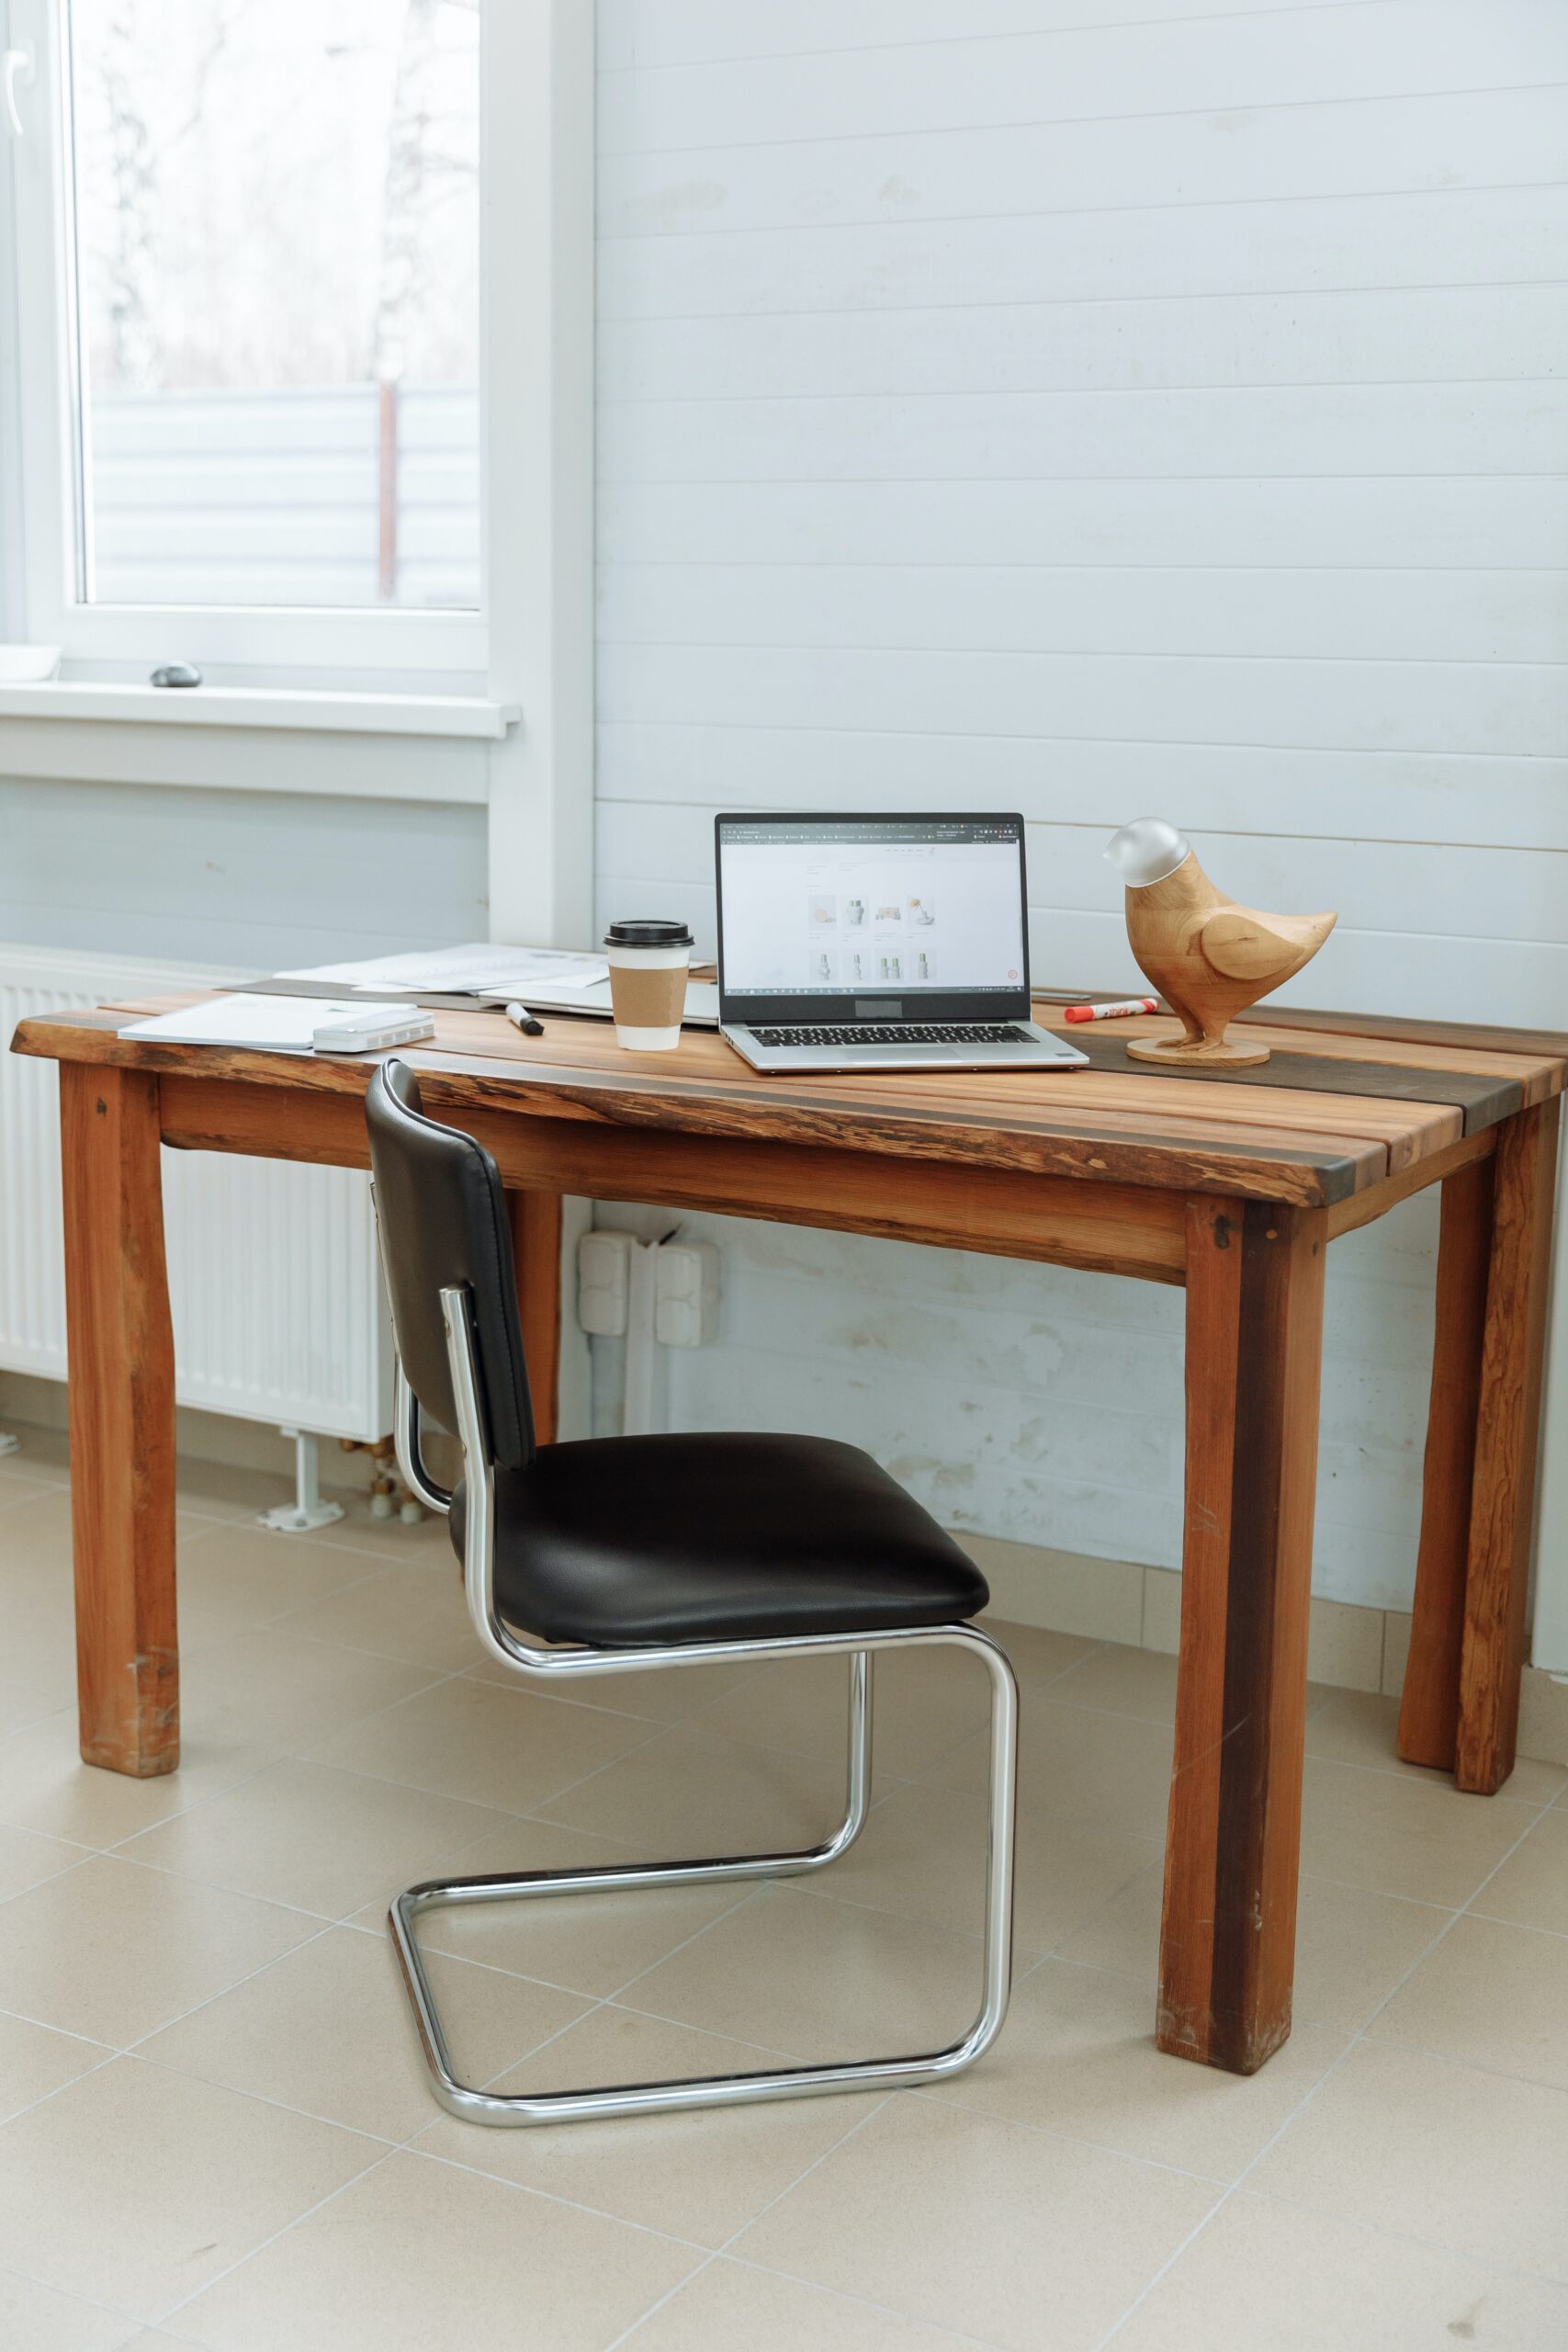 A desk with a laptop on it and a black chair in front of it, used as the promotional image for a blog post on whether it's better to DIY or hire out your business' website copy.